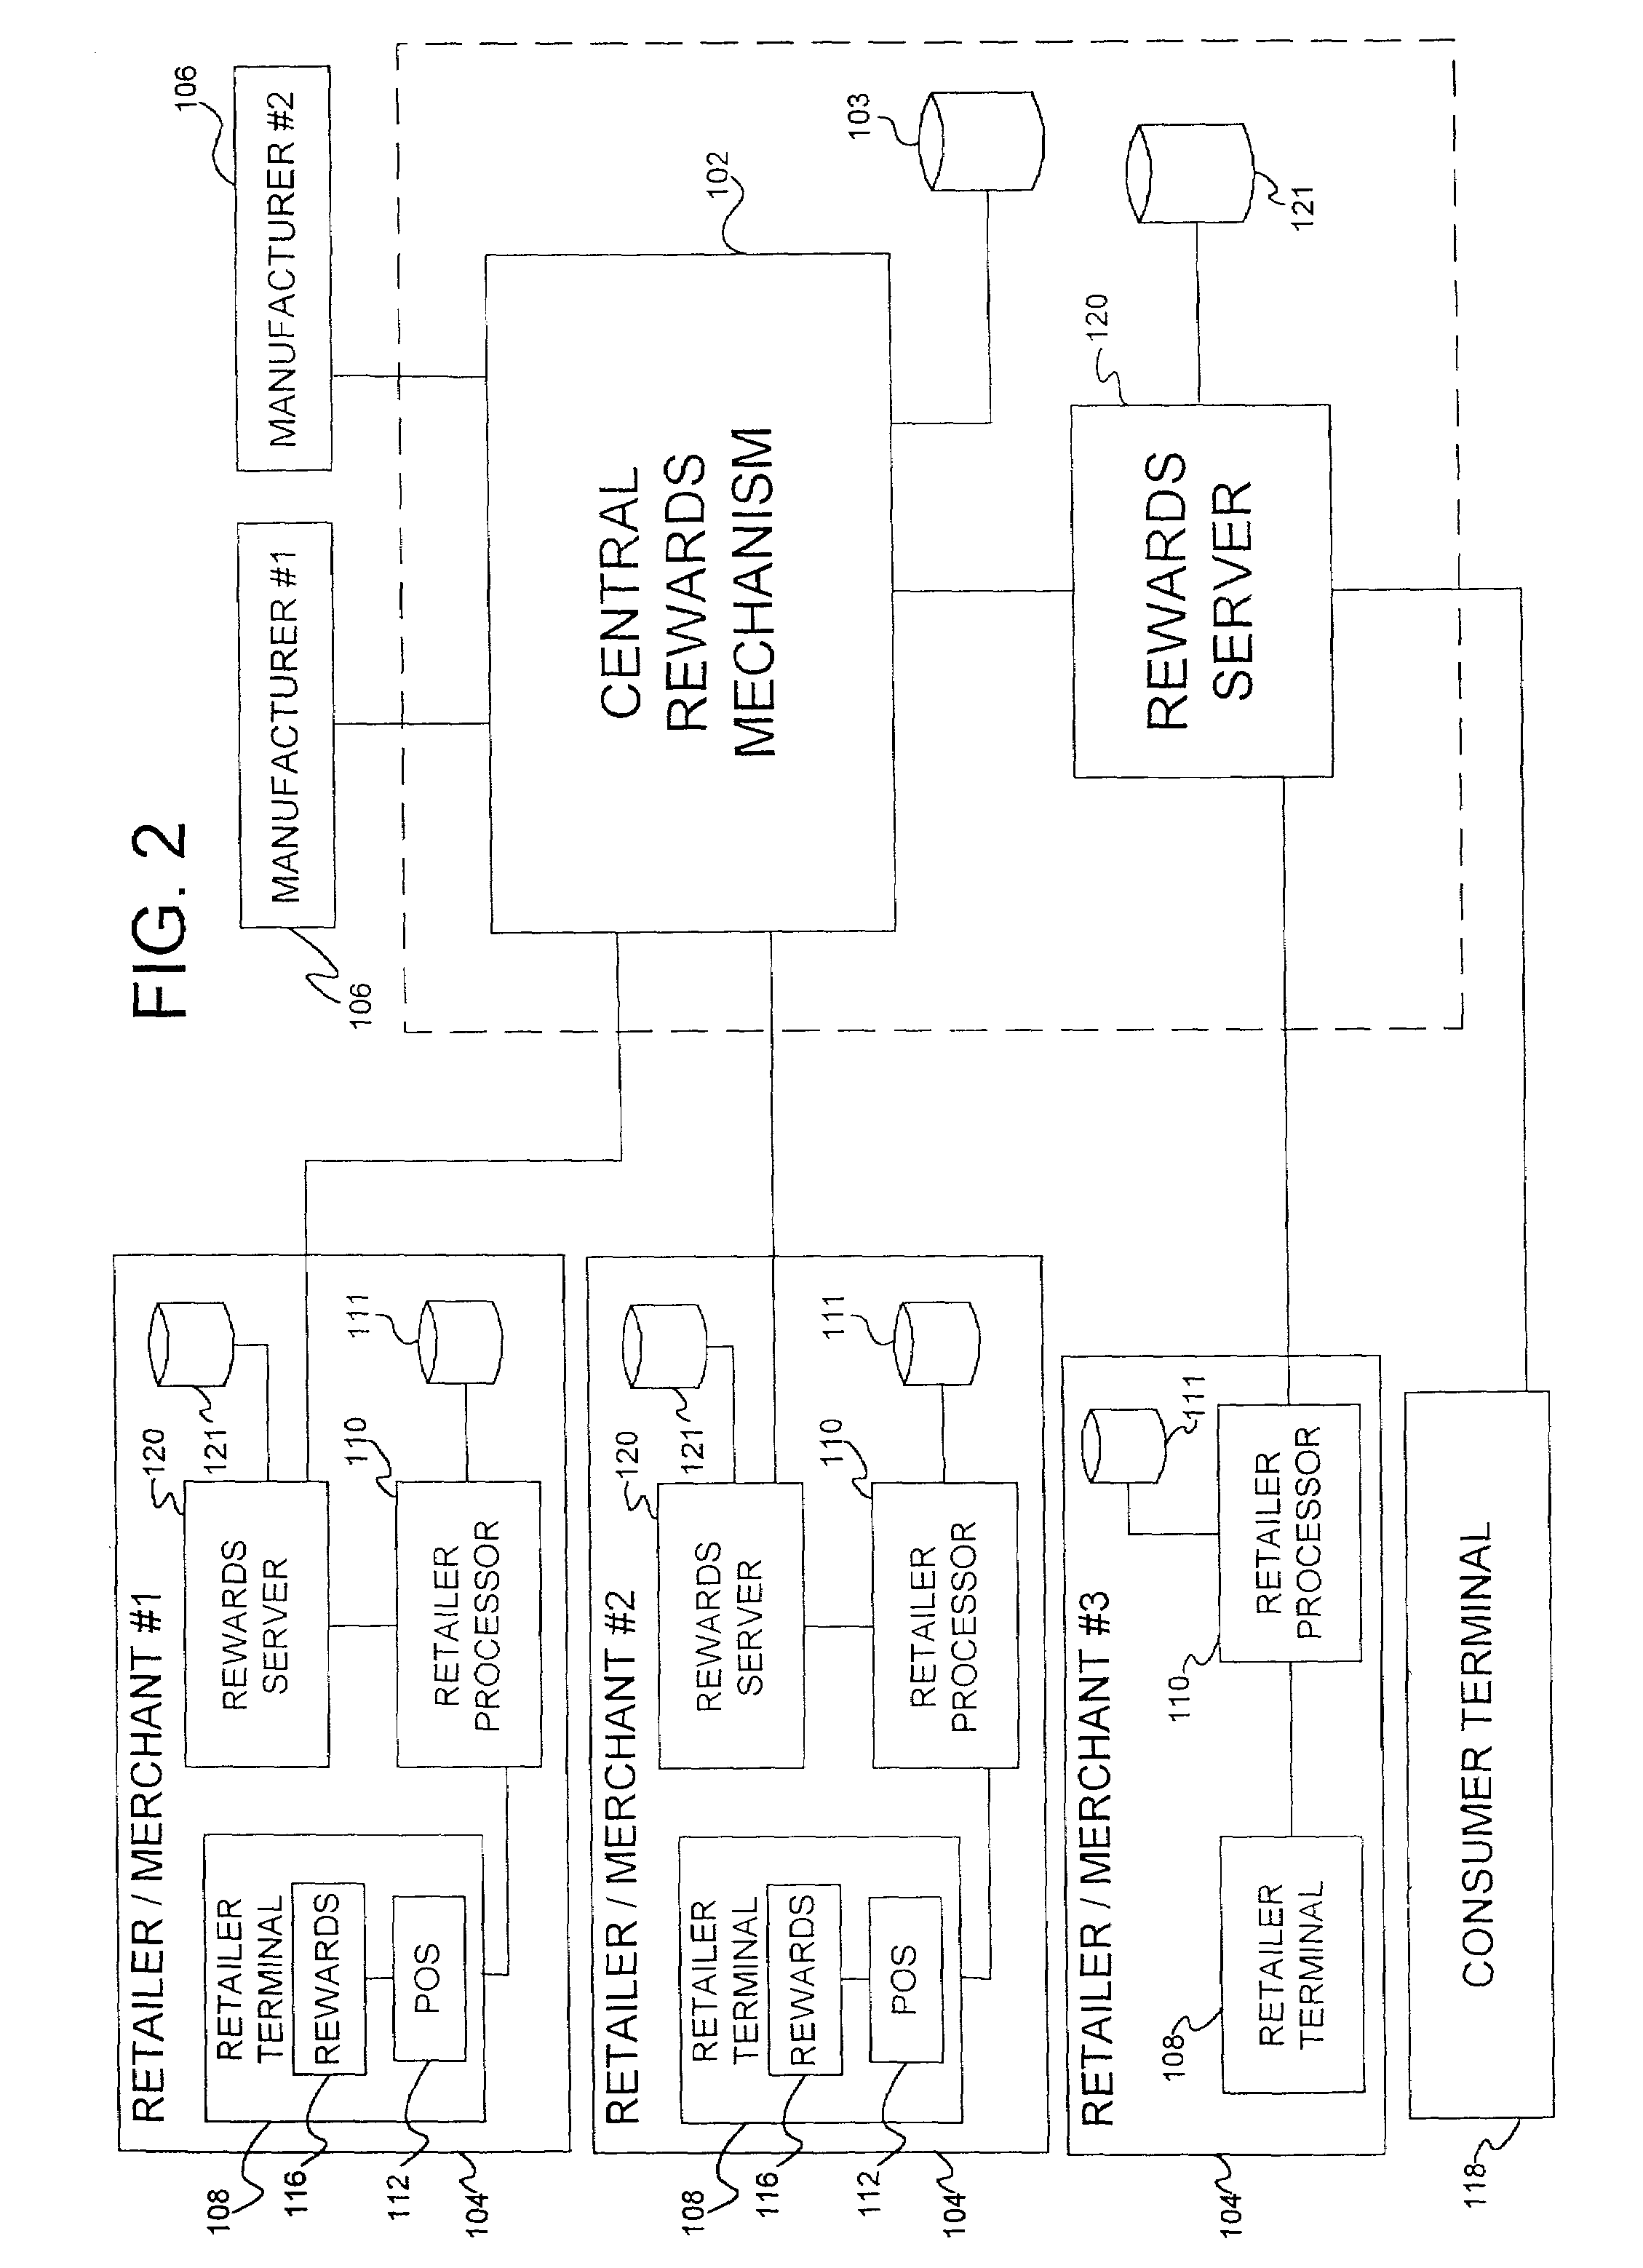 System and method for securing data through a PDA portal